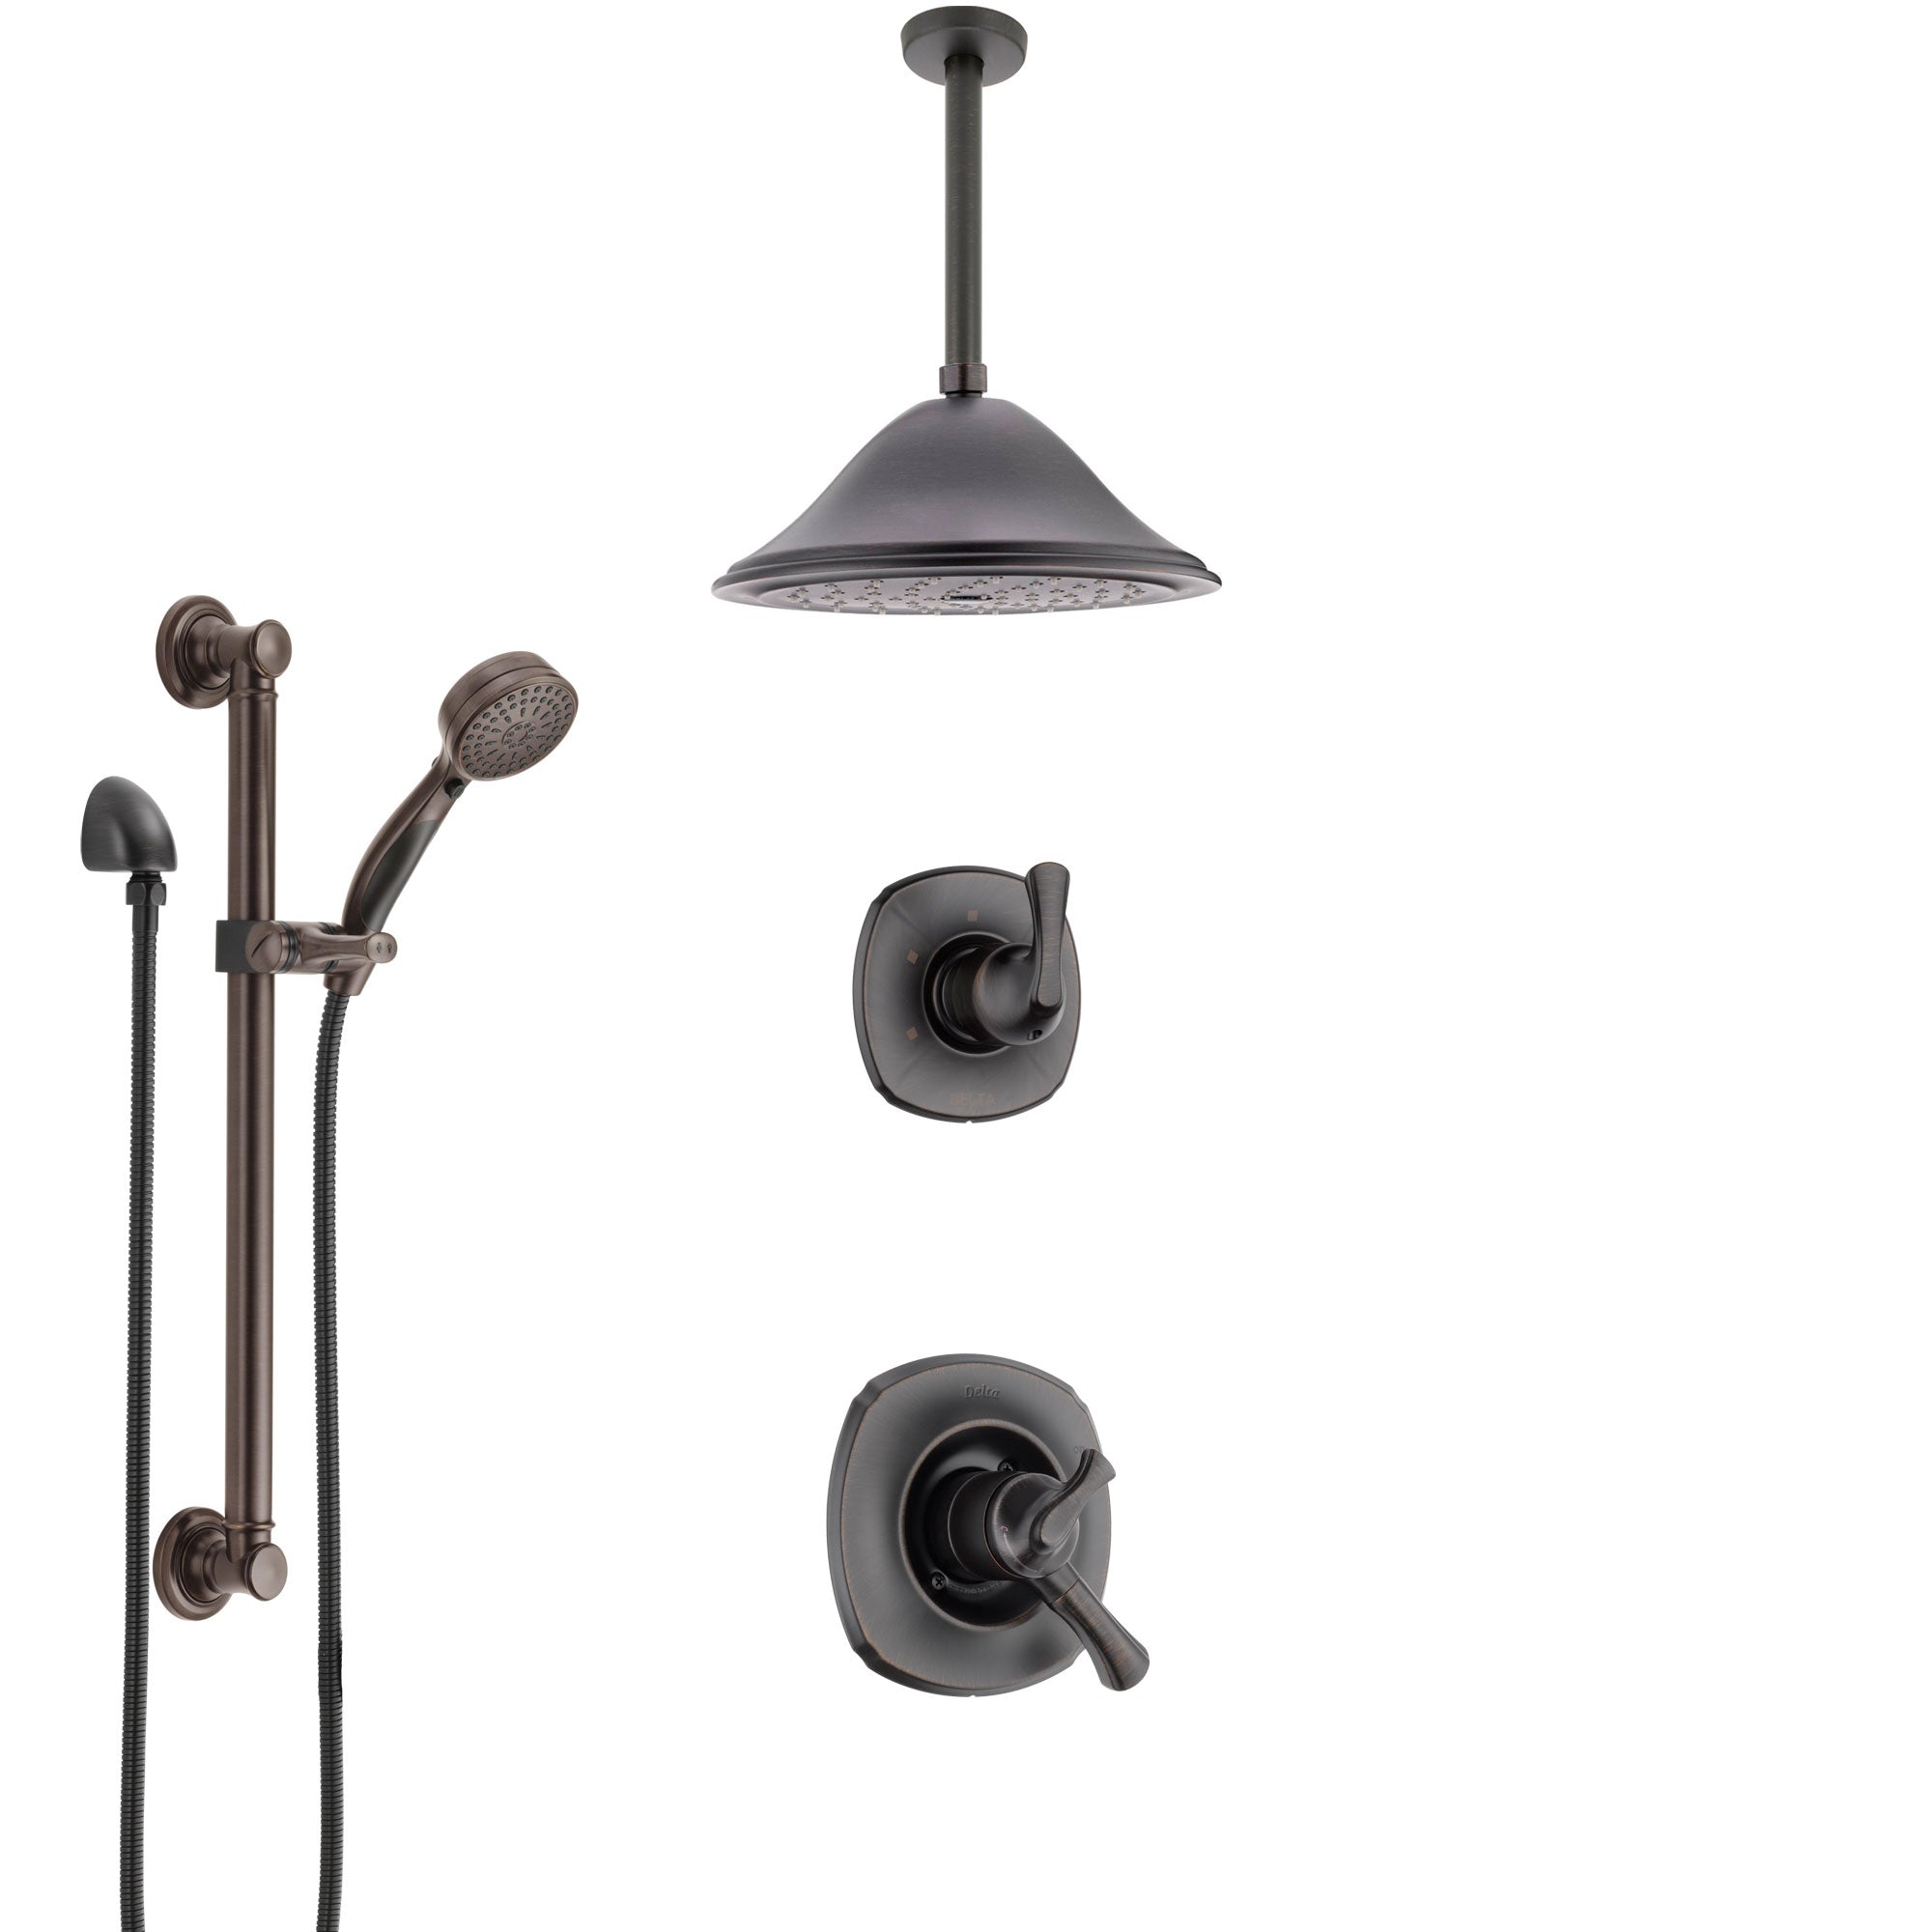 Delta Addison Venetian Bronze Shower System with Dual Control Handle, Diverter, Ceiling Mount Showerhead, and Hand Shower with Grab Bar SS1792RB4